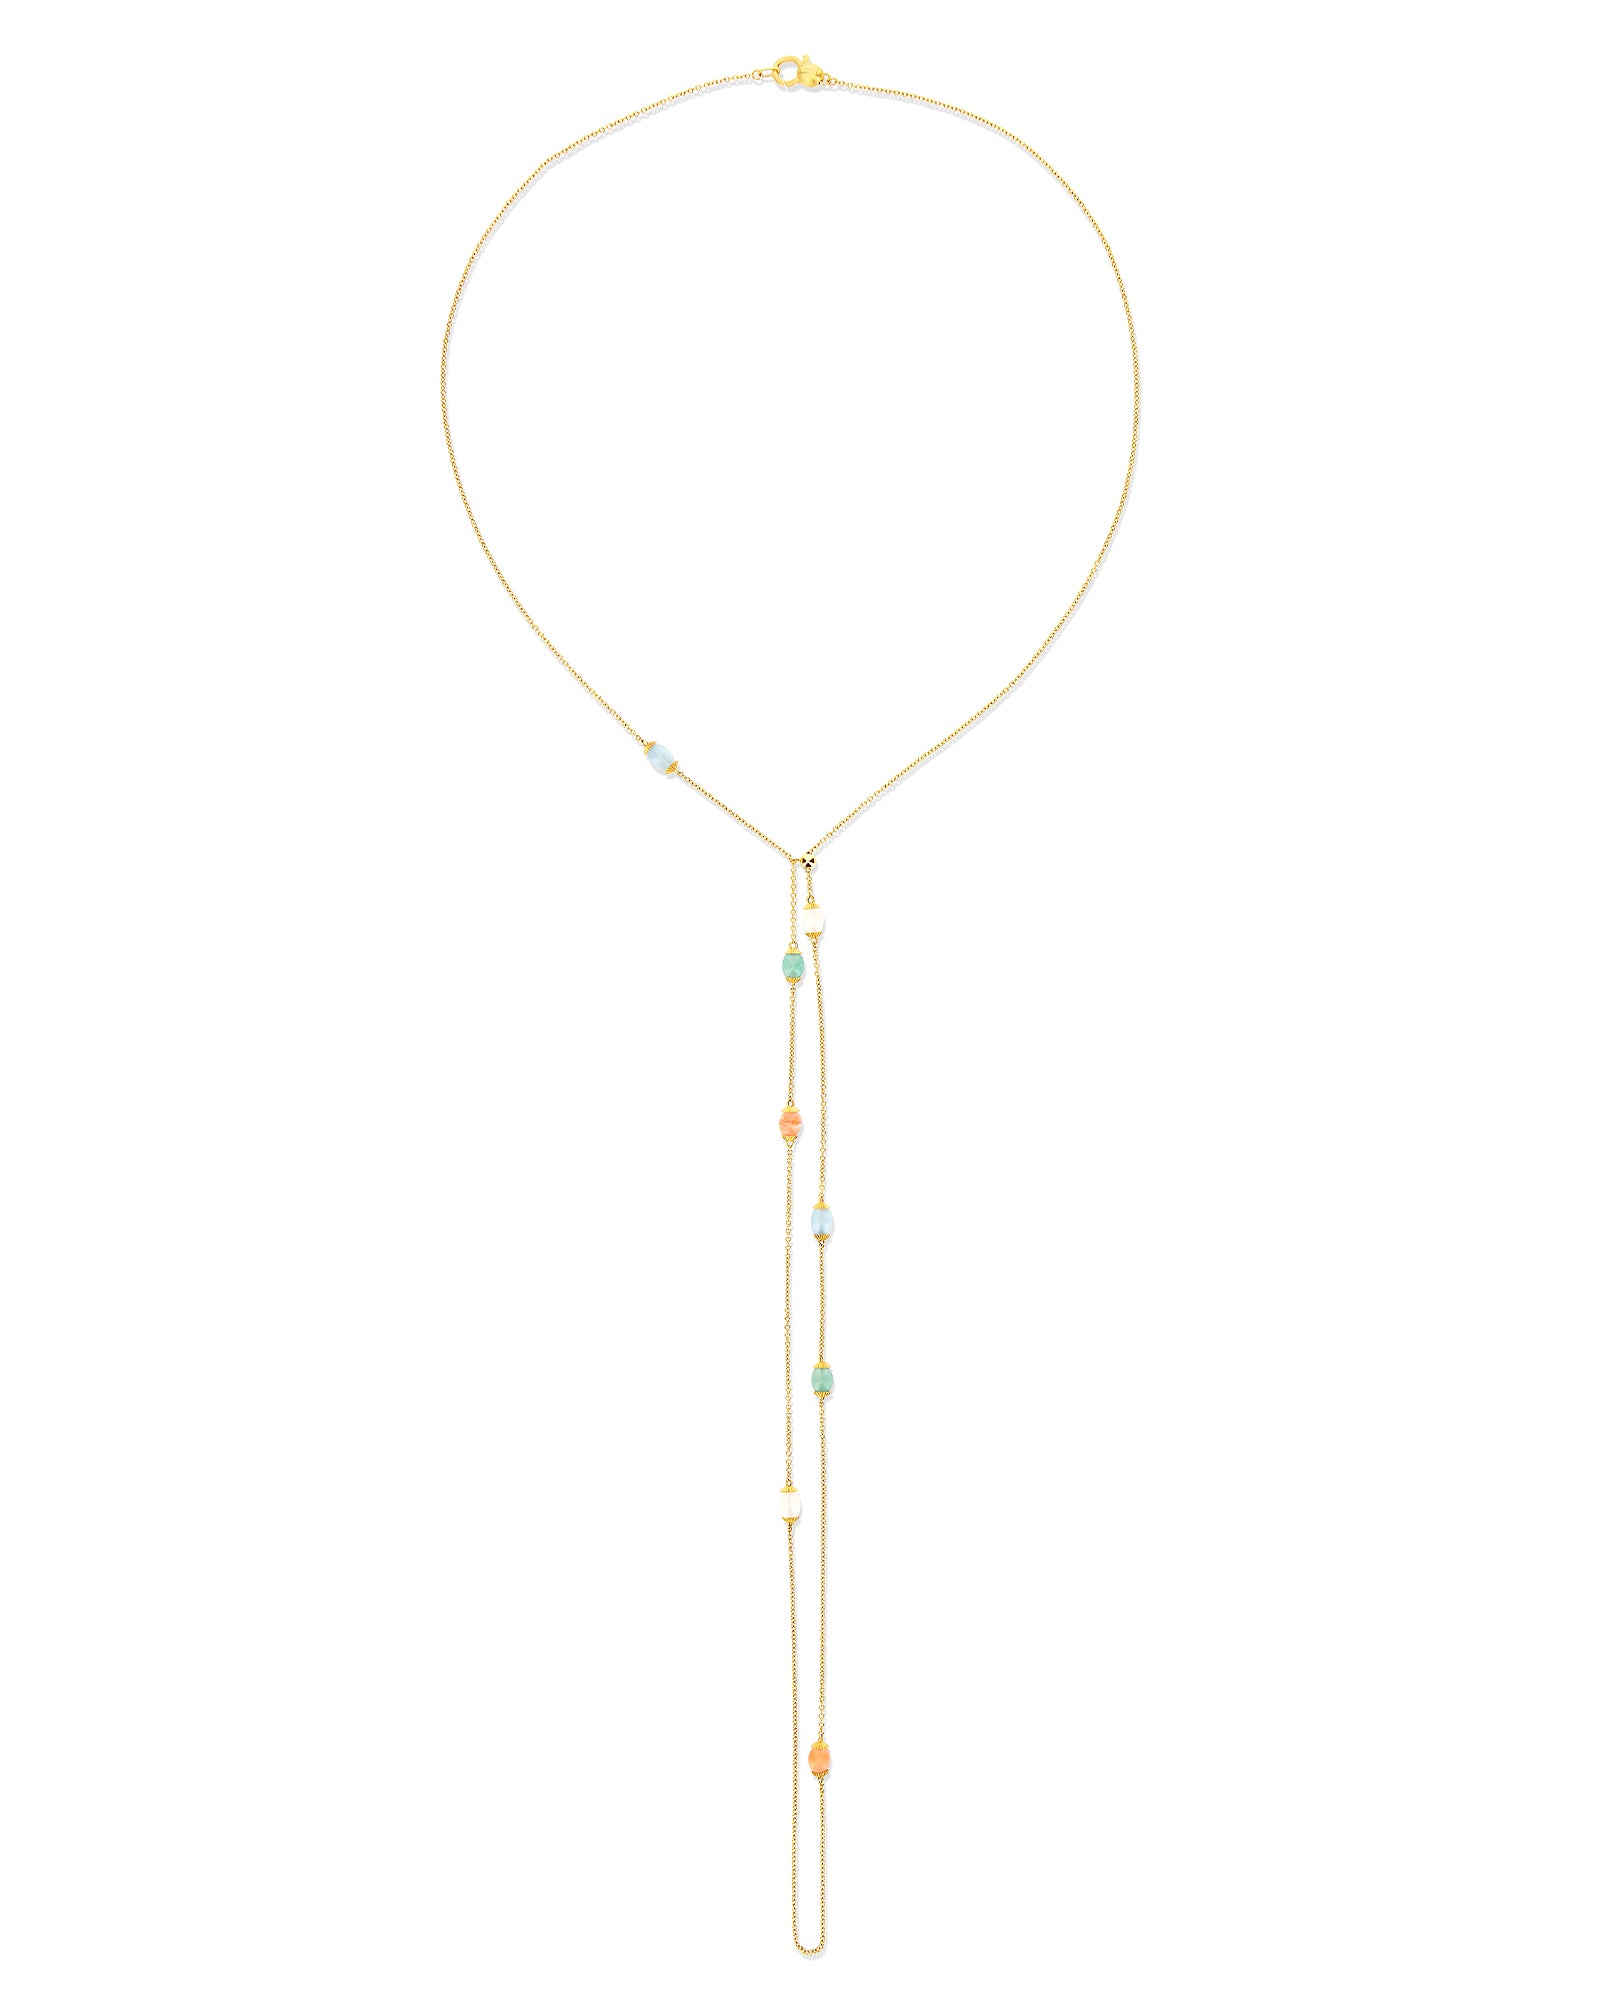 Rainbow "Amulets" Gold and Natural Stones Convertible Necklace (LARGE)